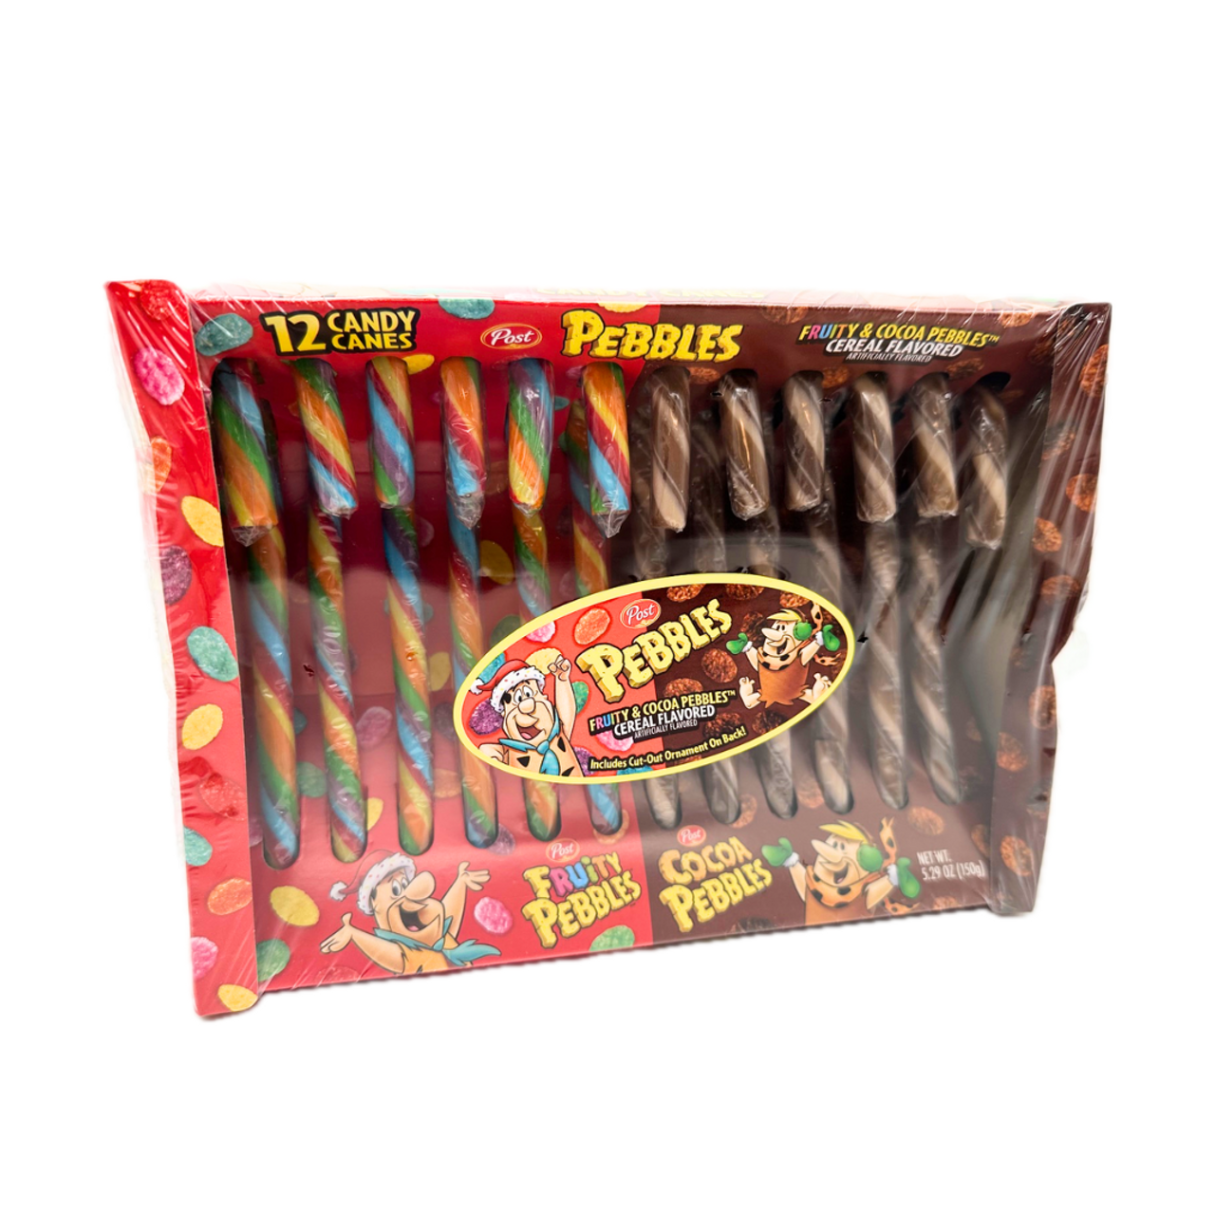 Pebbles Cereal Flavored Candy Canes 5.29oz - 12ct